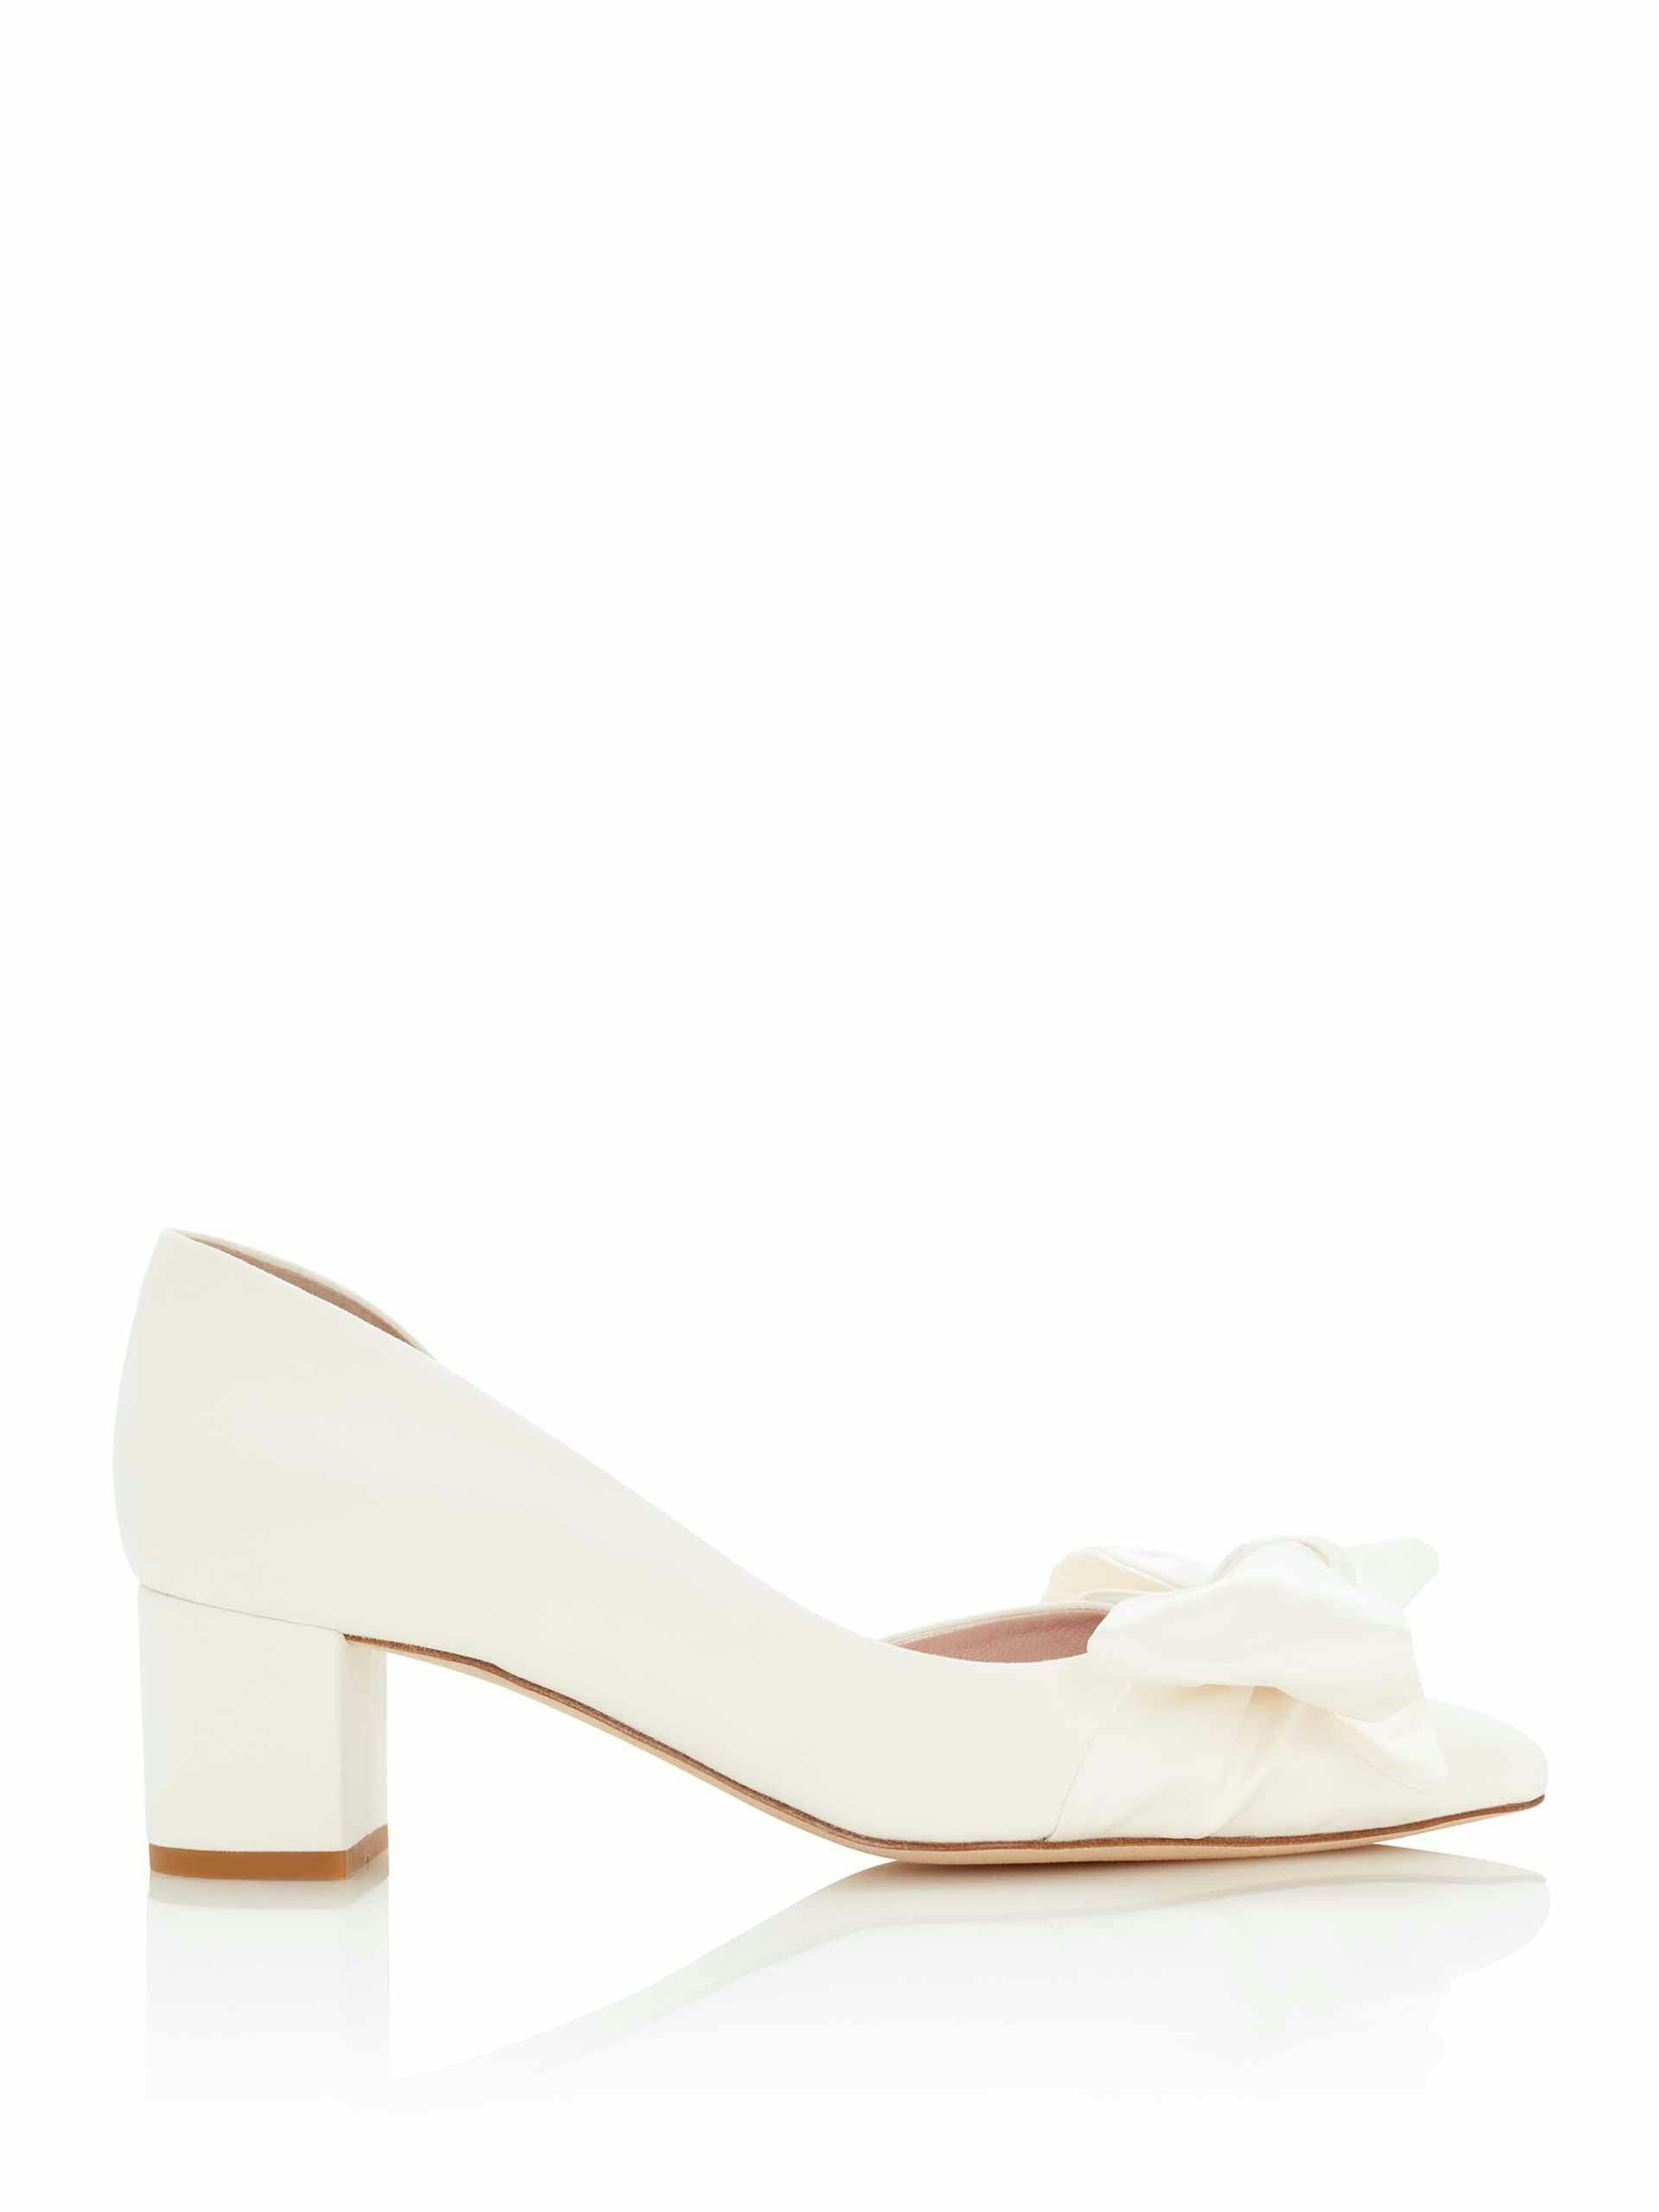 Ivory suede pumps with satin bow